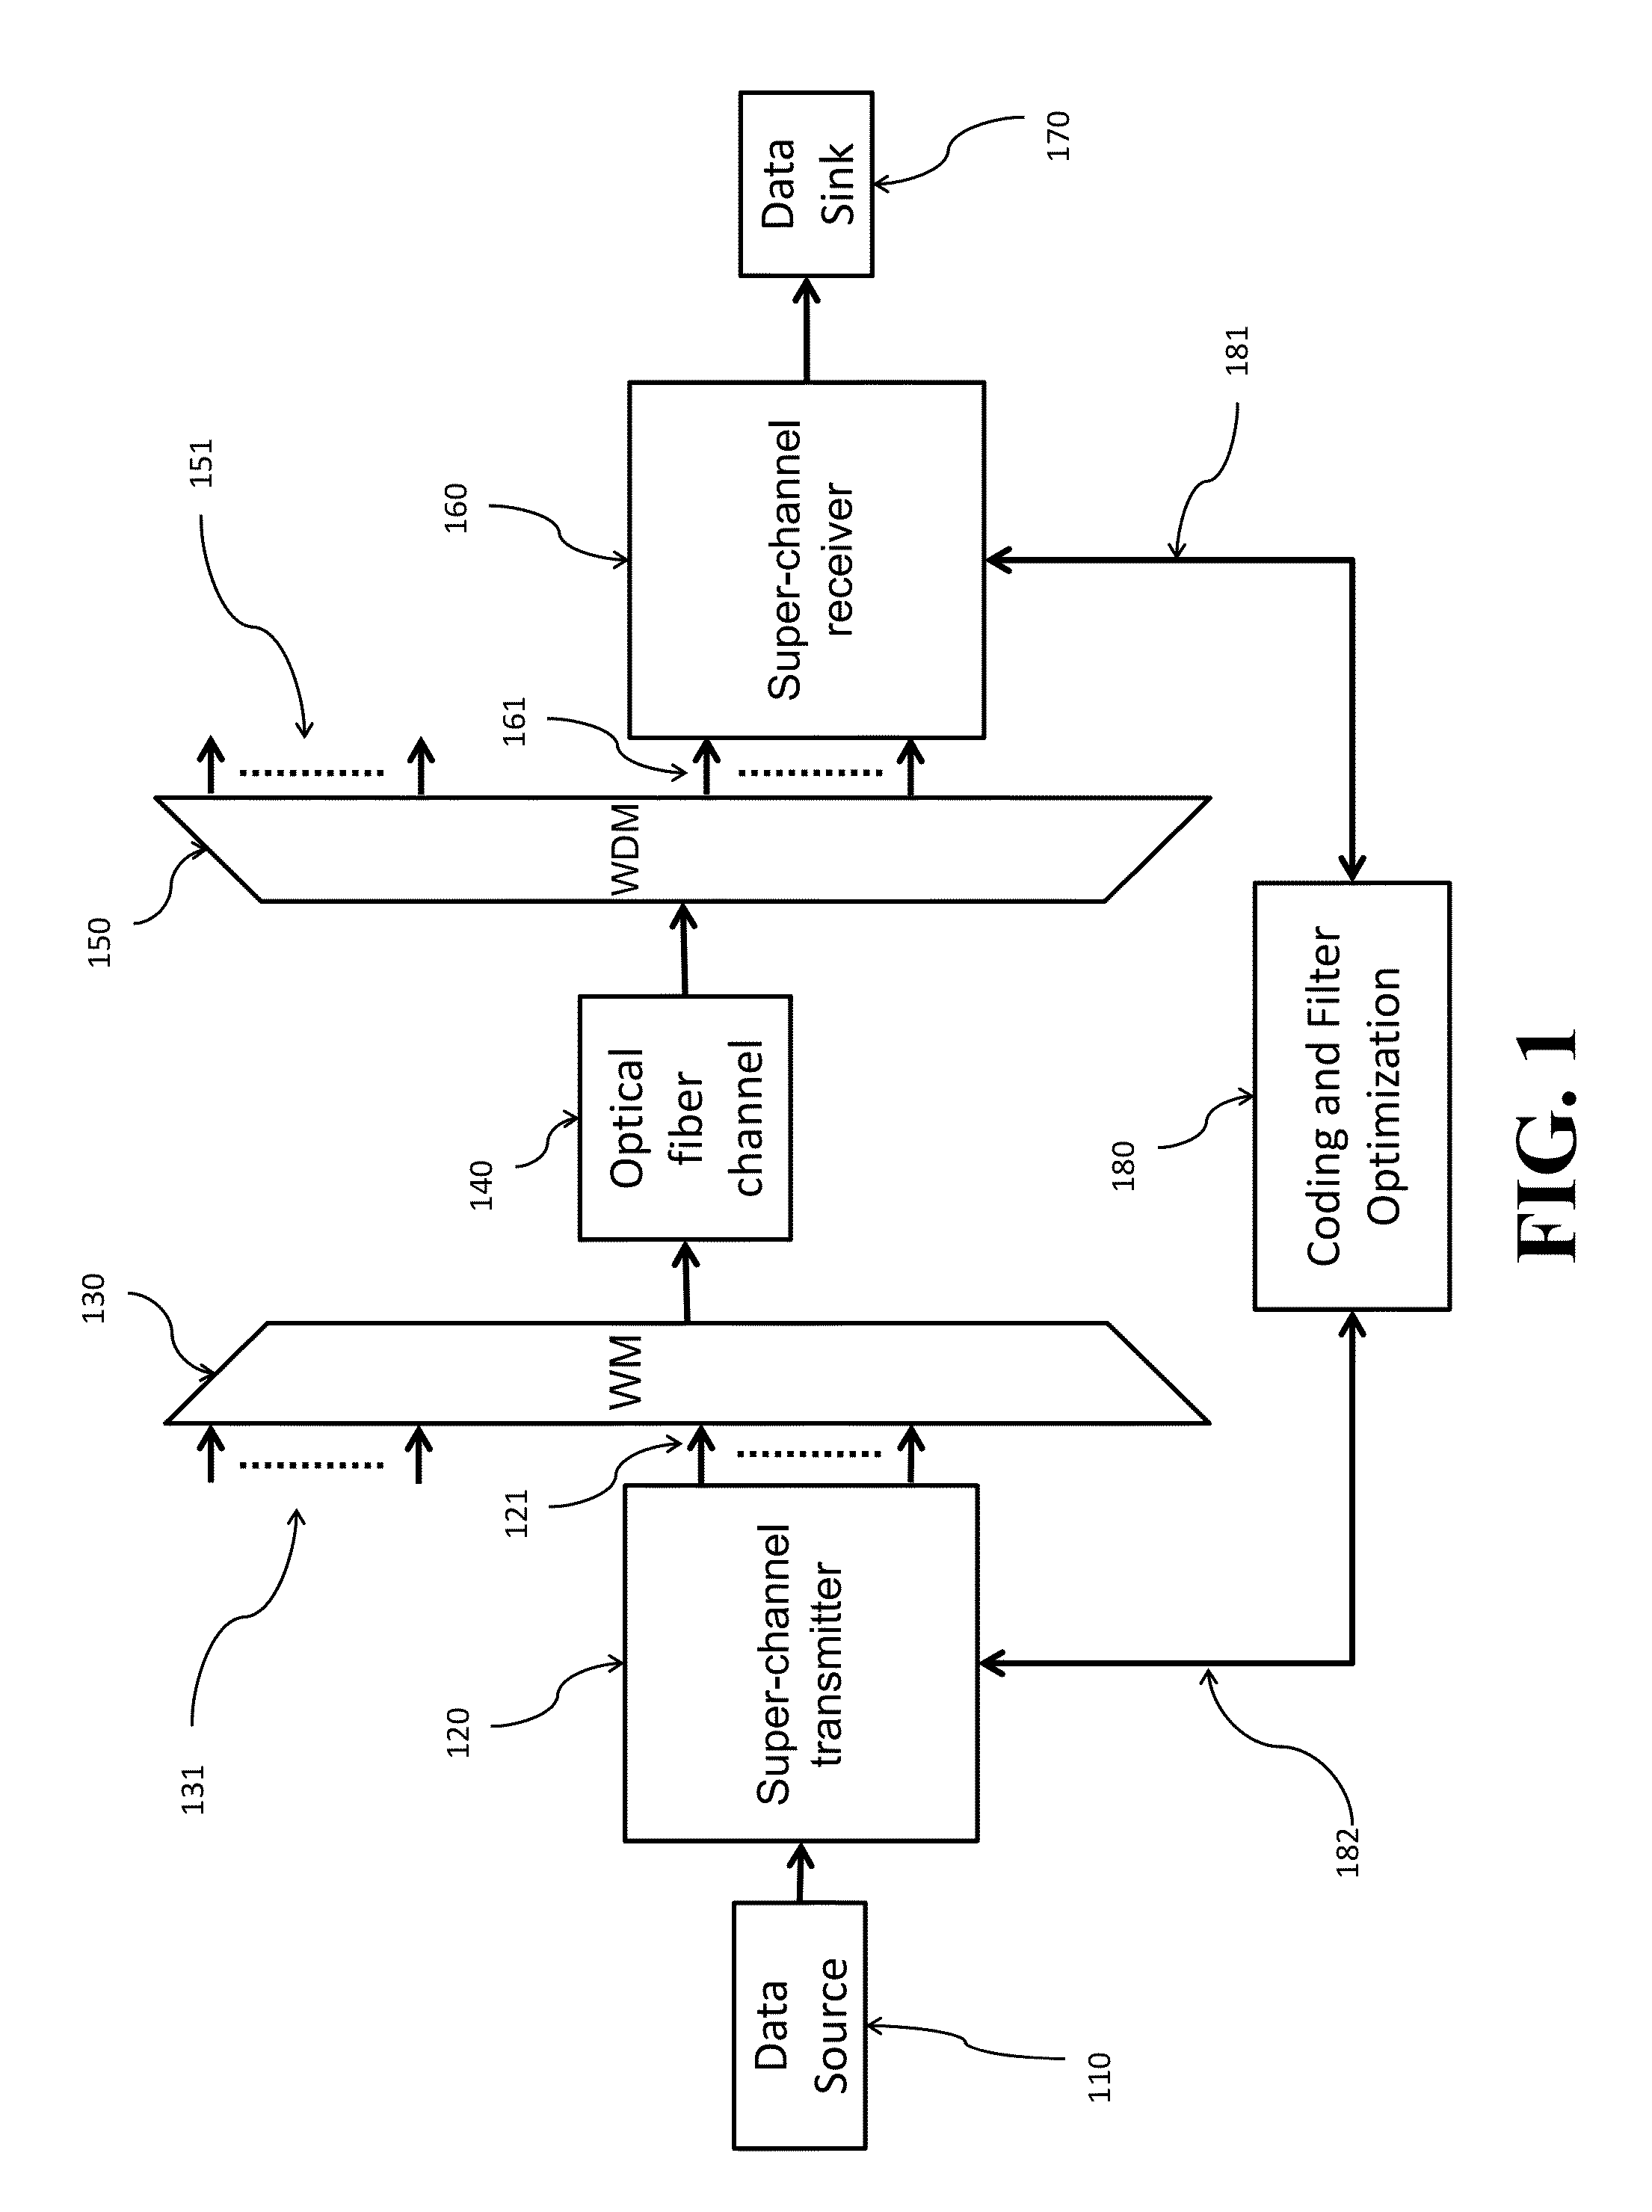 Inter-Channel Interference Management for Optical Super-Channels